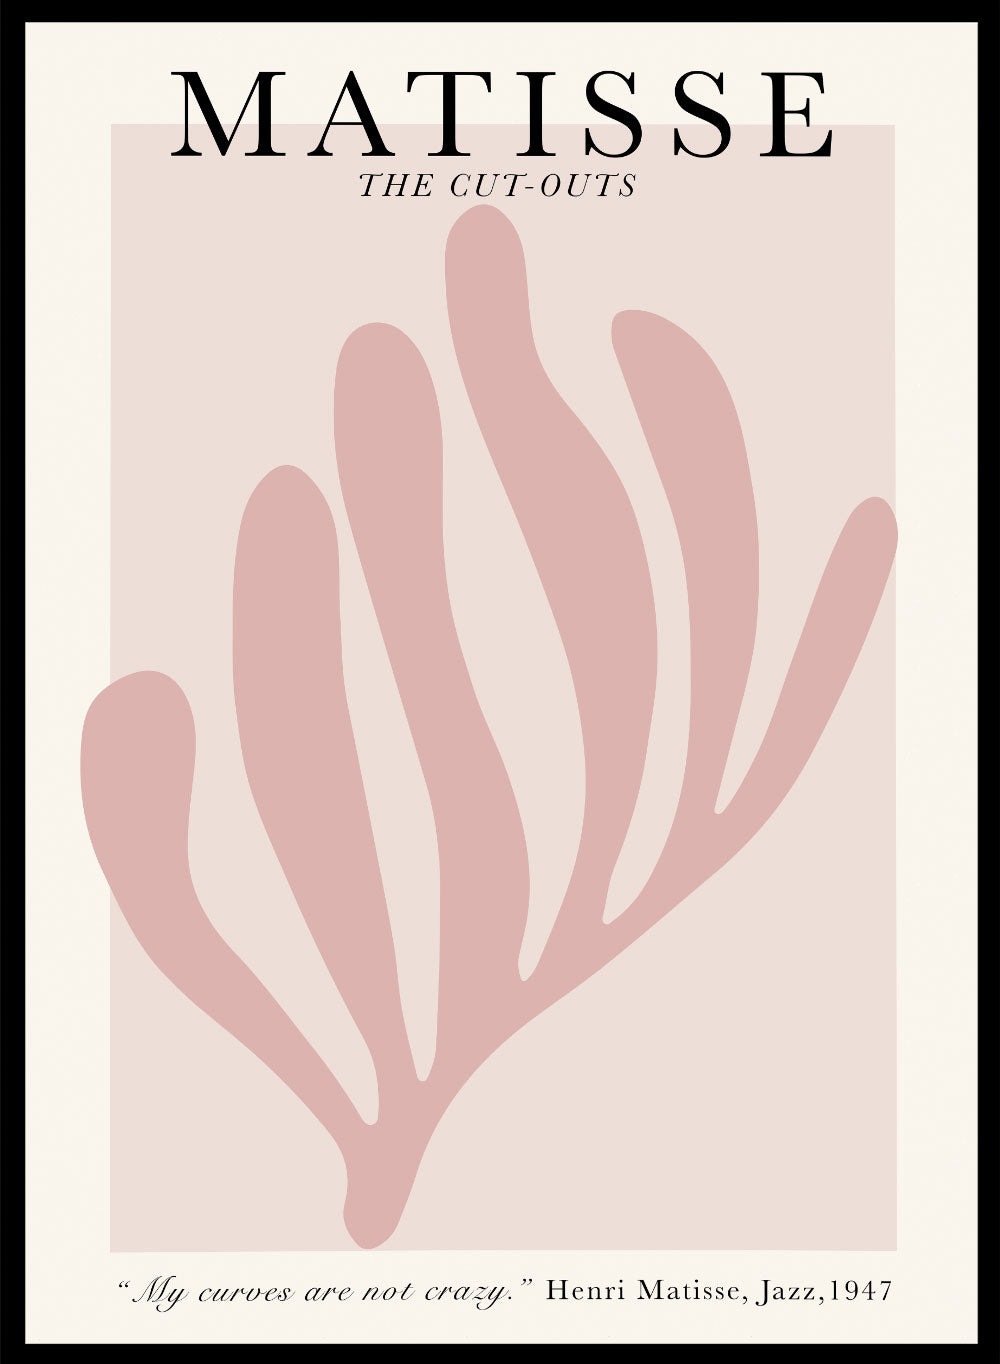 Henri Matisse, The Cut-Outs Series - Exhibition Poster No. 4